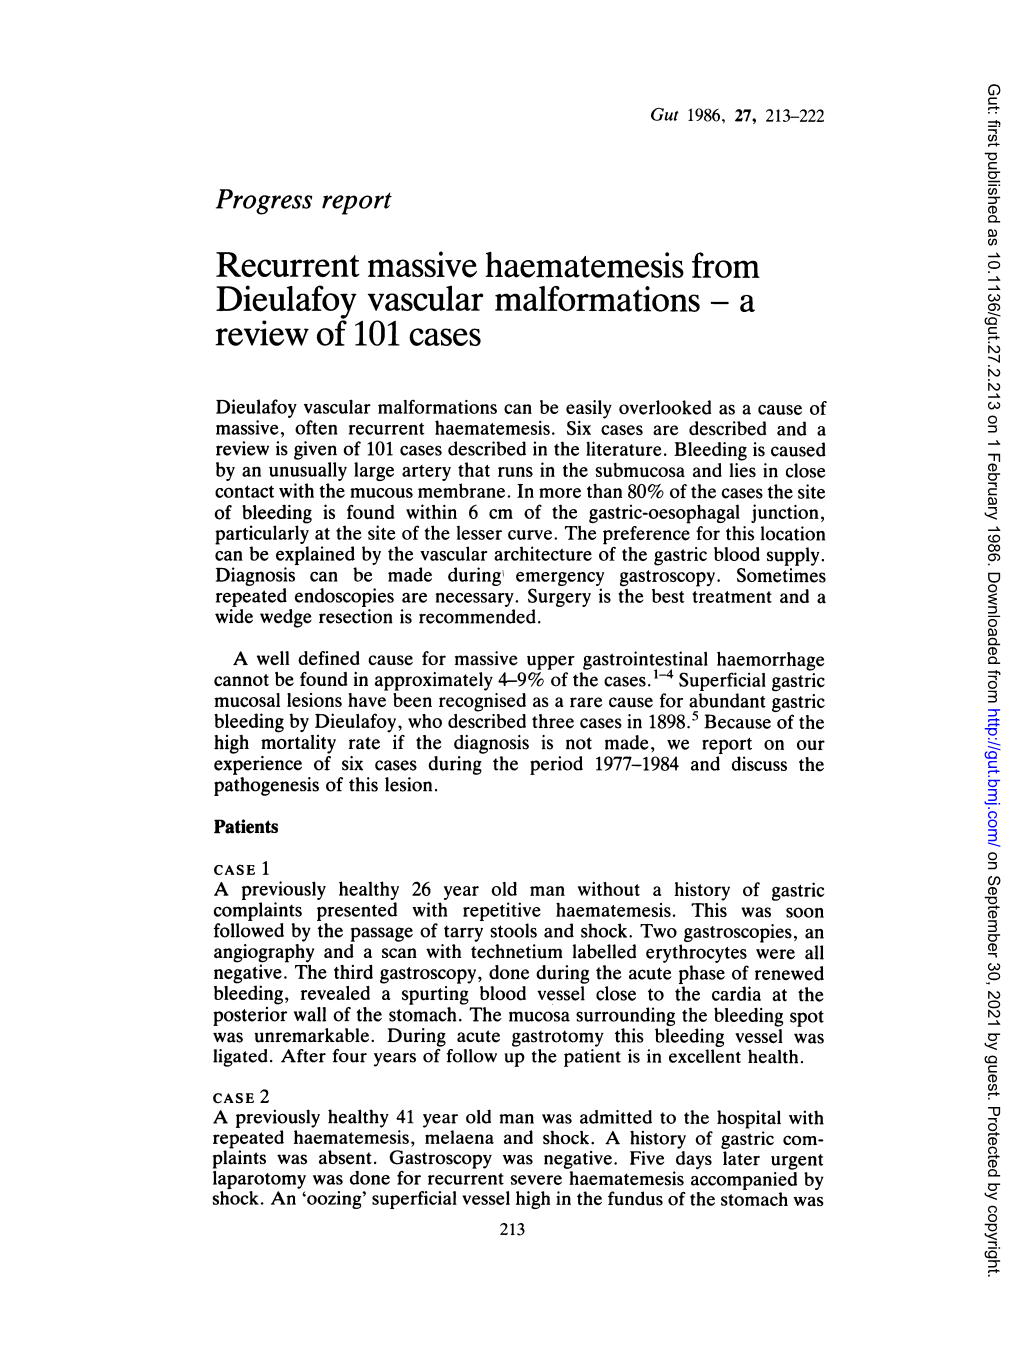 Recurrent Massive Haematemesis from Dieulafoy Vascular Malformations - a Review of 101 Cases